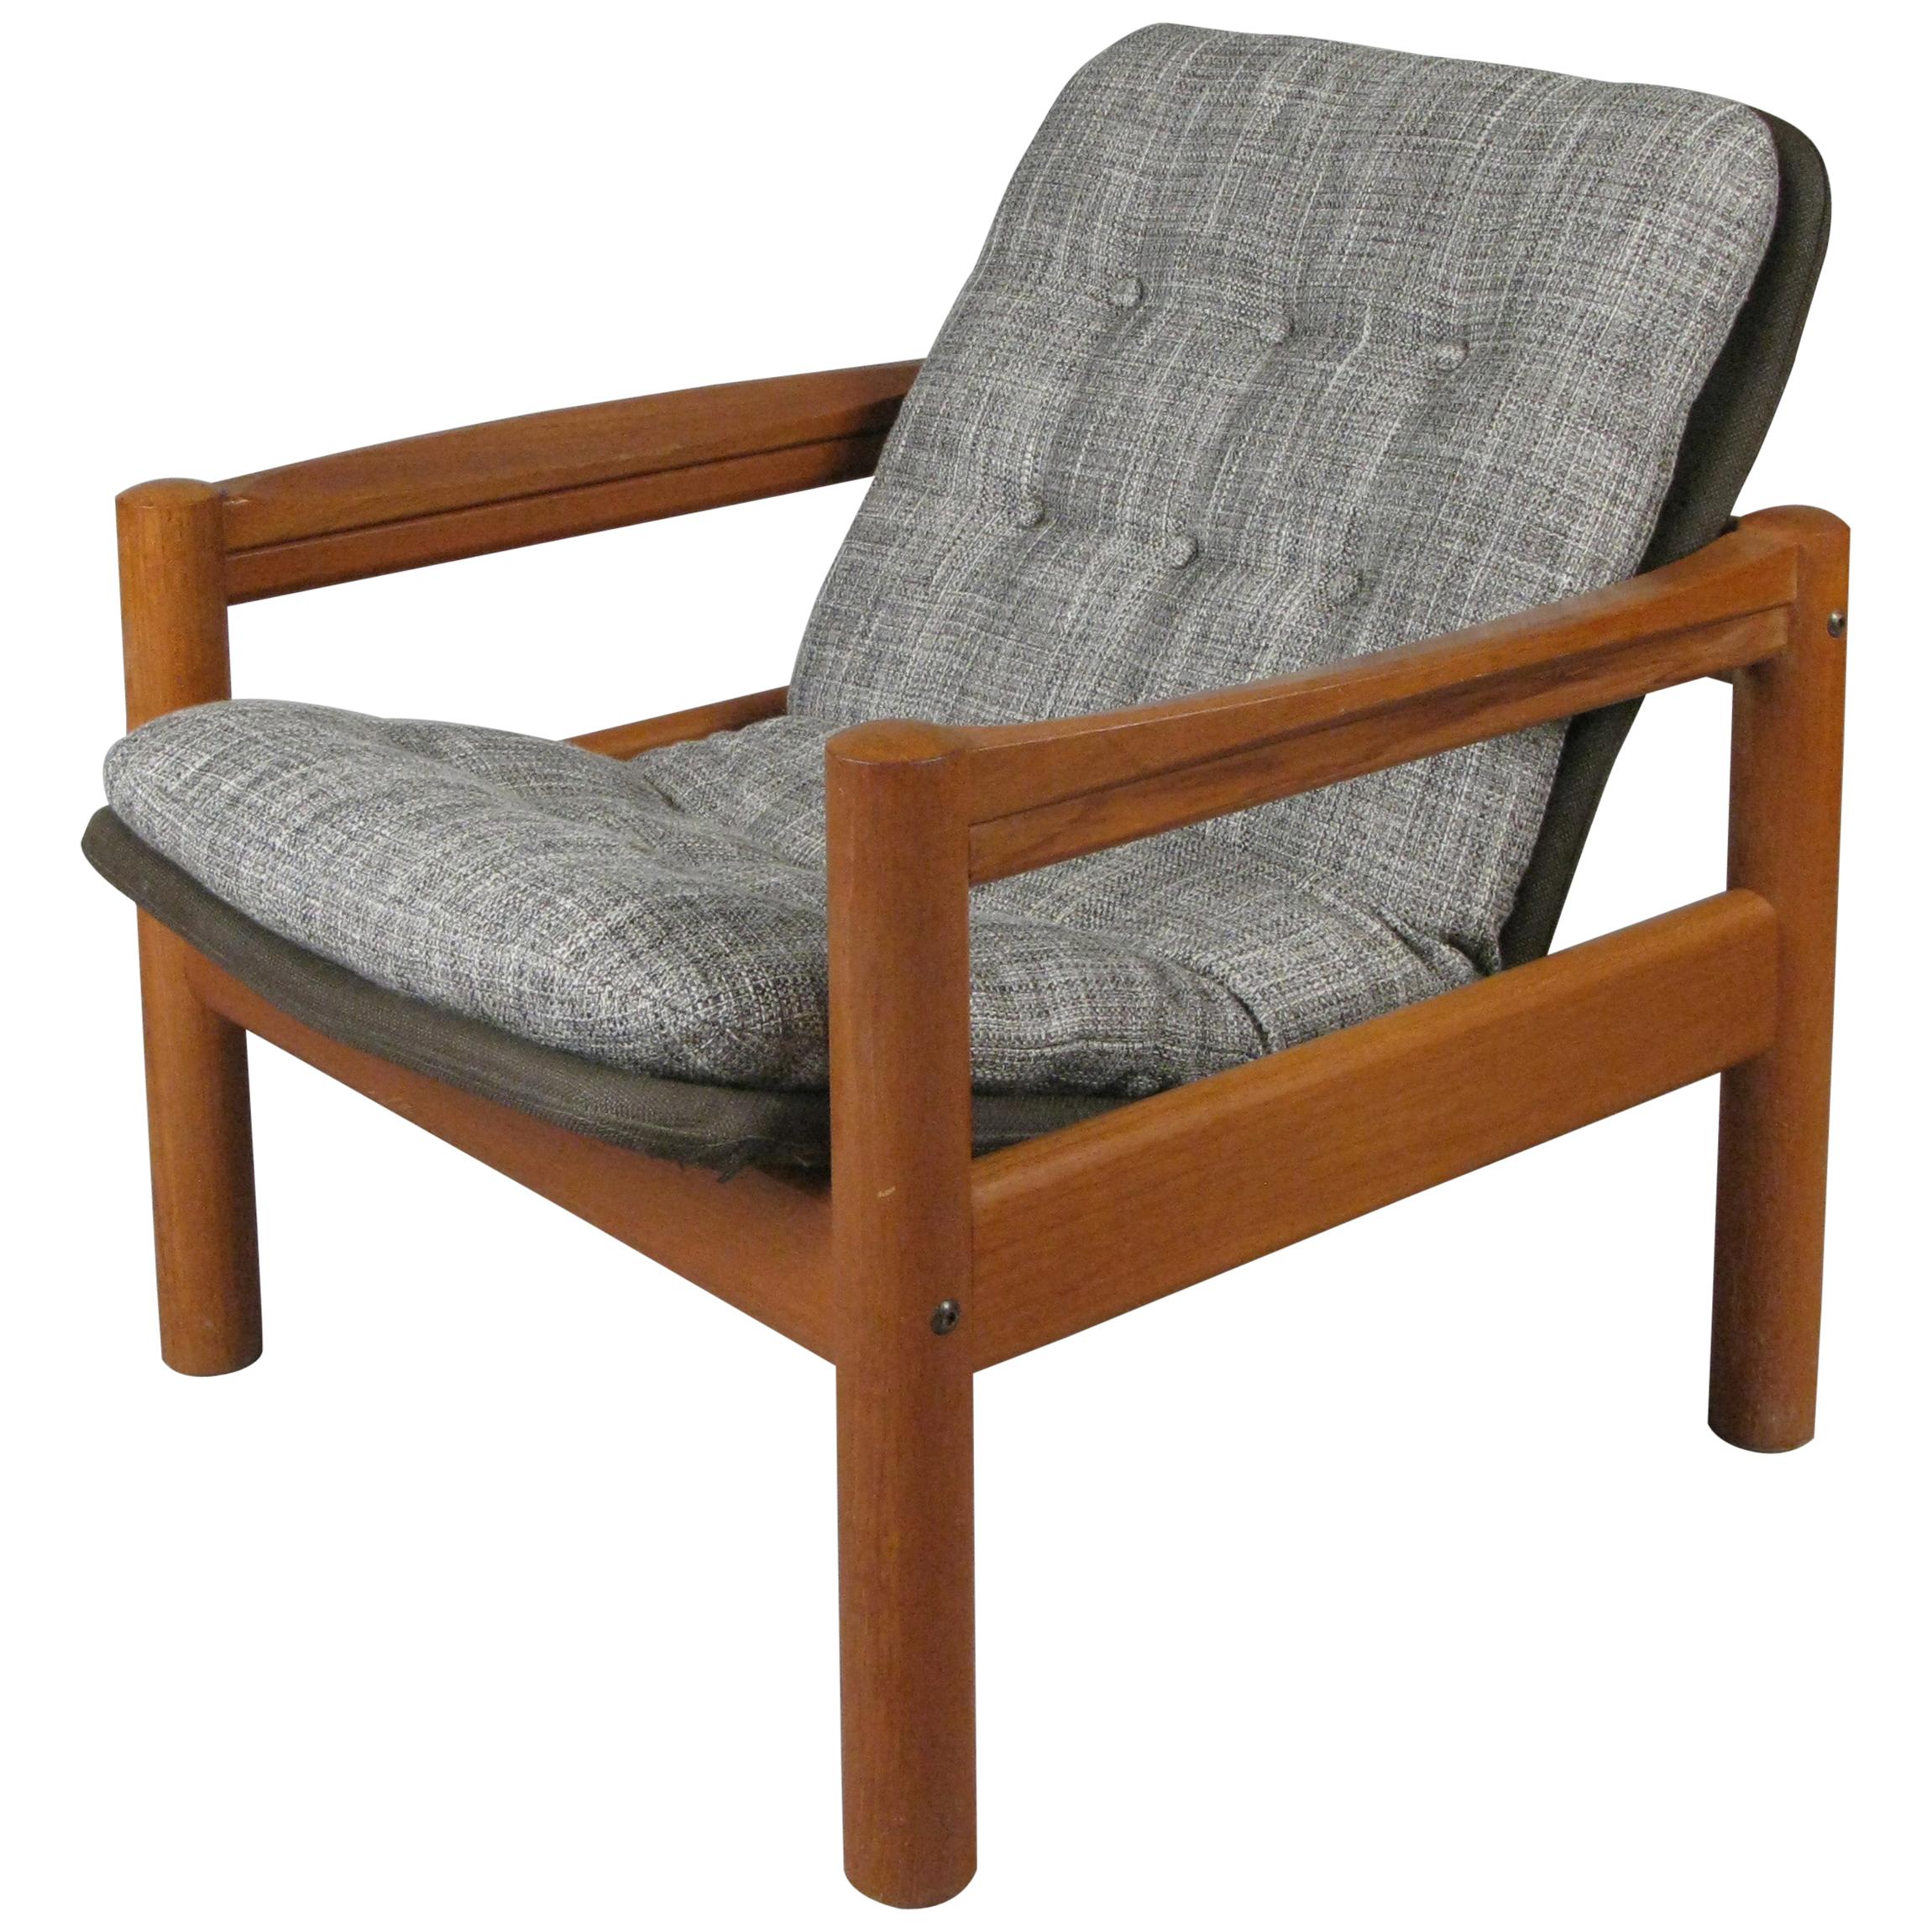 1970s Danish Teak Lounge Chair by Domino Møbler